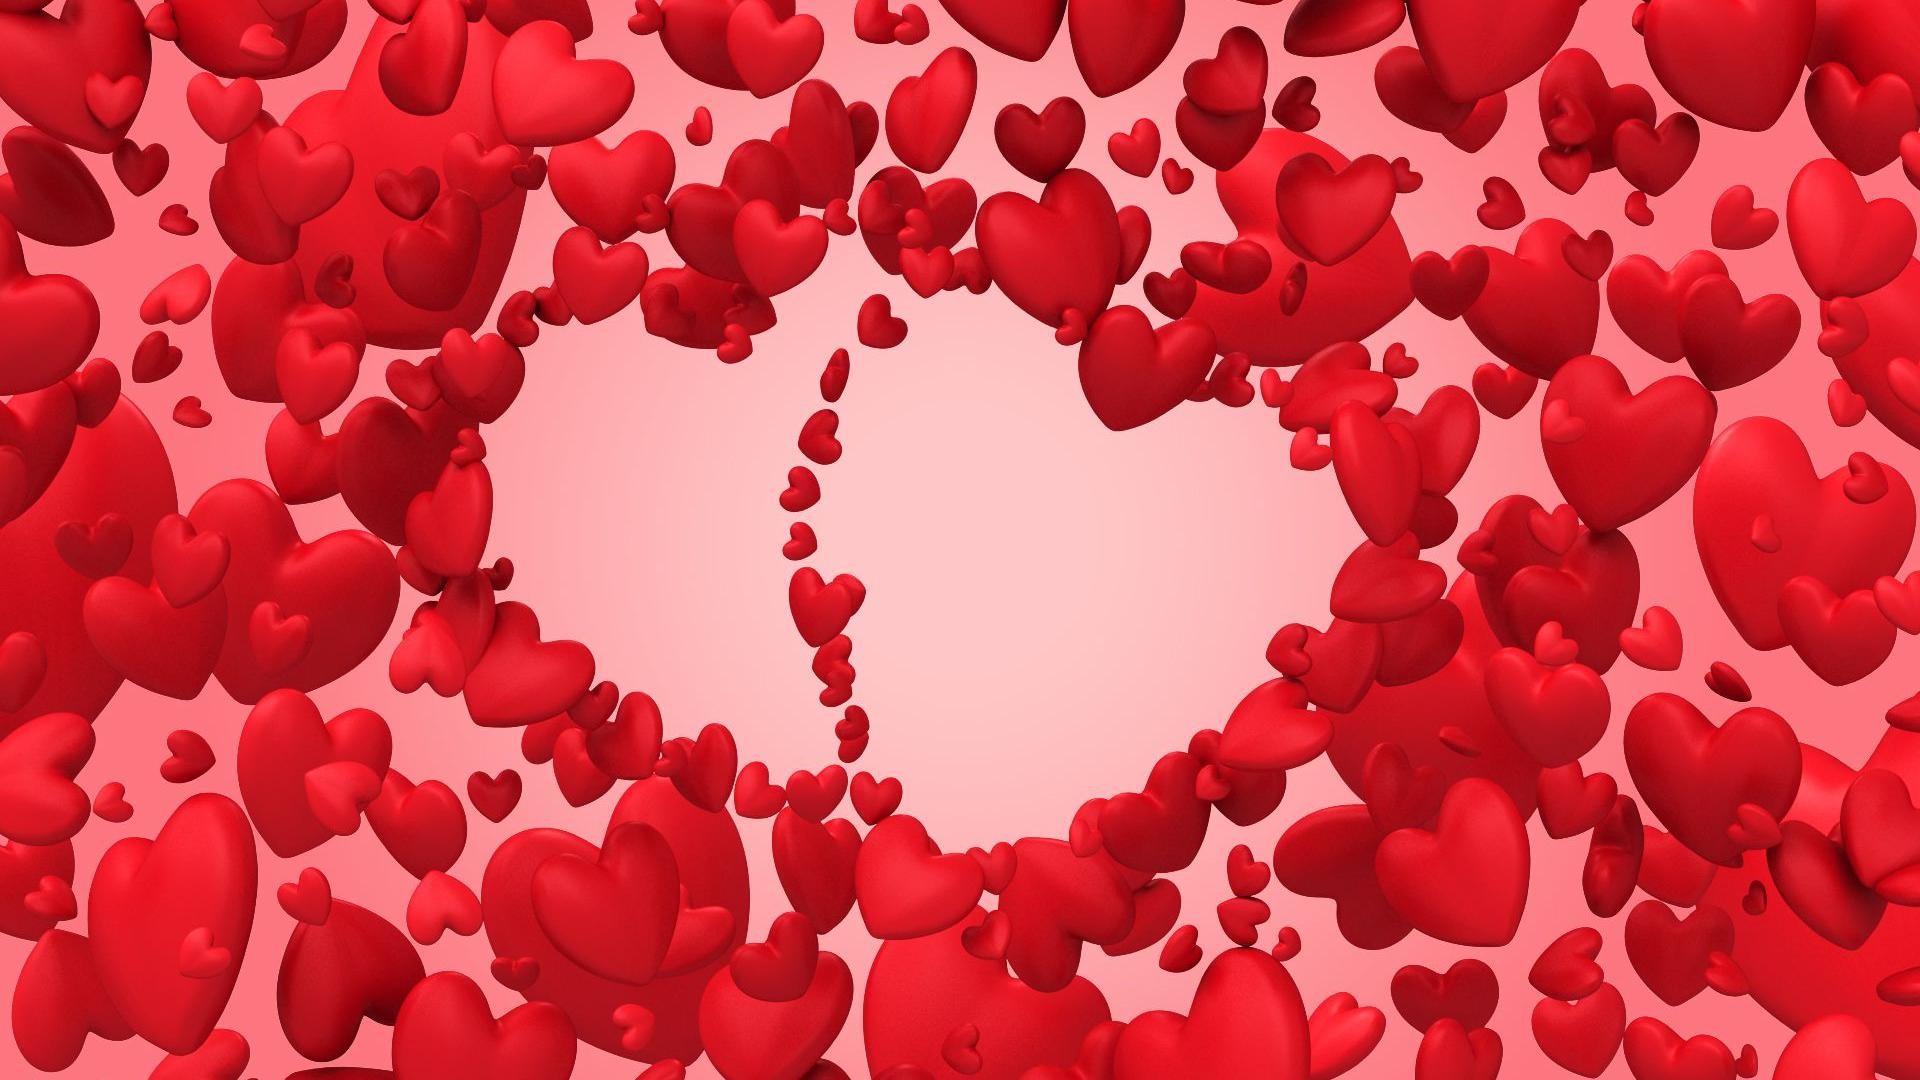 1920x1080 Happy Valentines Day Wallpapers 2015, Valentines Day Wallpaper